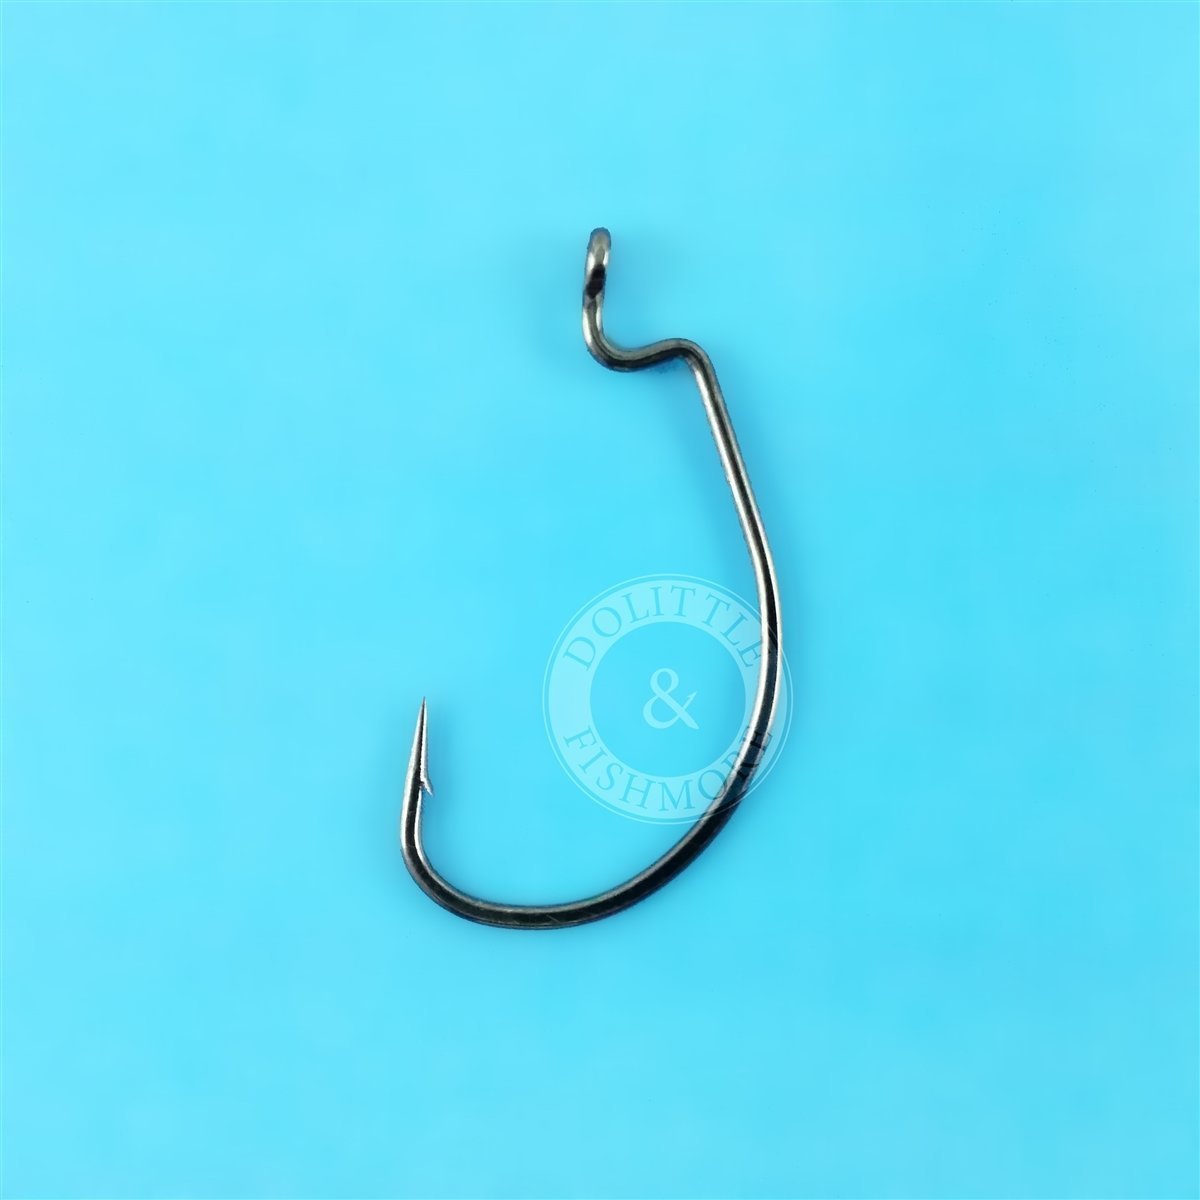 VMC 3X-Strong Wide Gap Worm Hook 7317 – Black Nickel – Dolittle and  Fishmore – Fishing Lures and Soft Plastic Bait